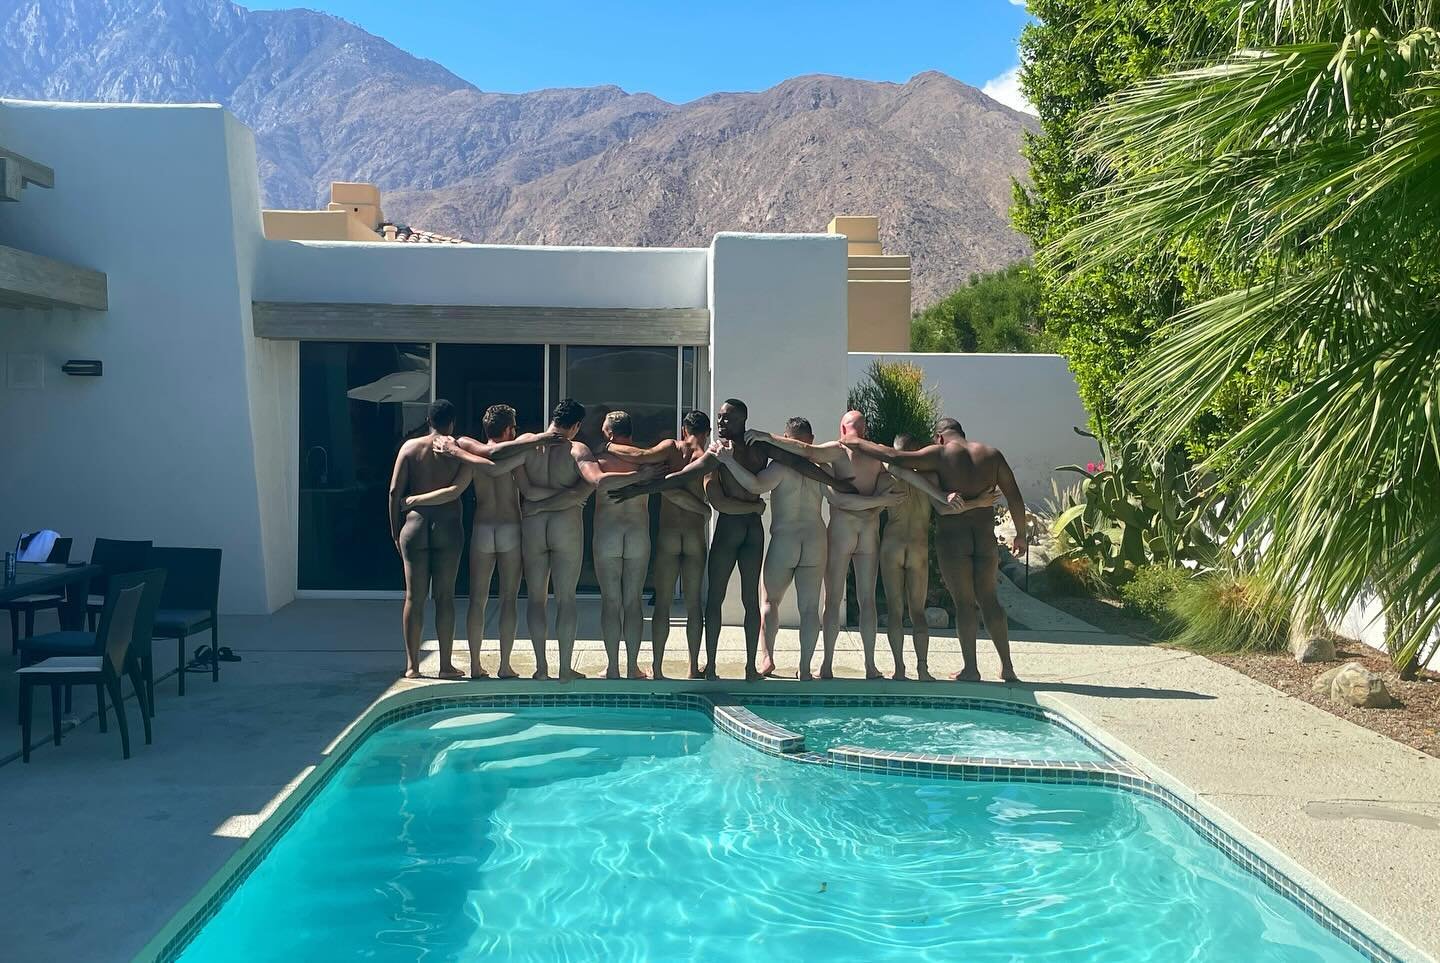 Down to our last King and Single Beds for the Joshua Tree Retreat 😋🙌🏾👬❤️. 

The Joshua Tree EROS Retreat Early Bird Sale ends at midnight tonight! 

- 5 night/6 day stay at our private villa 
- 5+ Workshops 
- Fun Group Excursions out and about 
